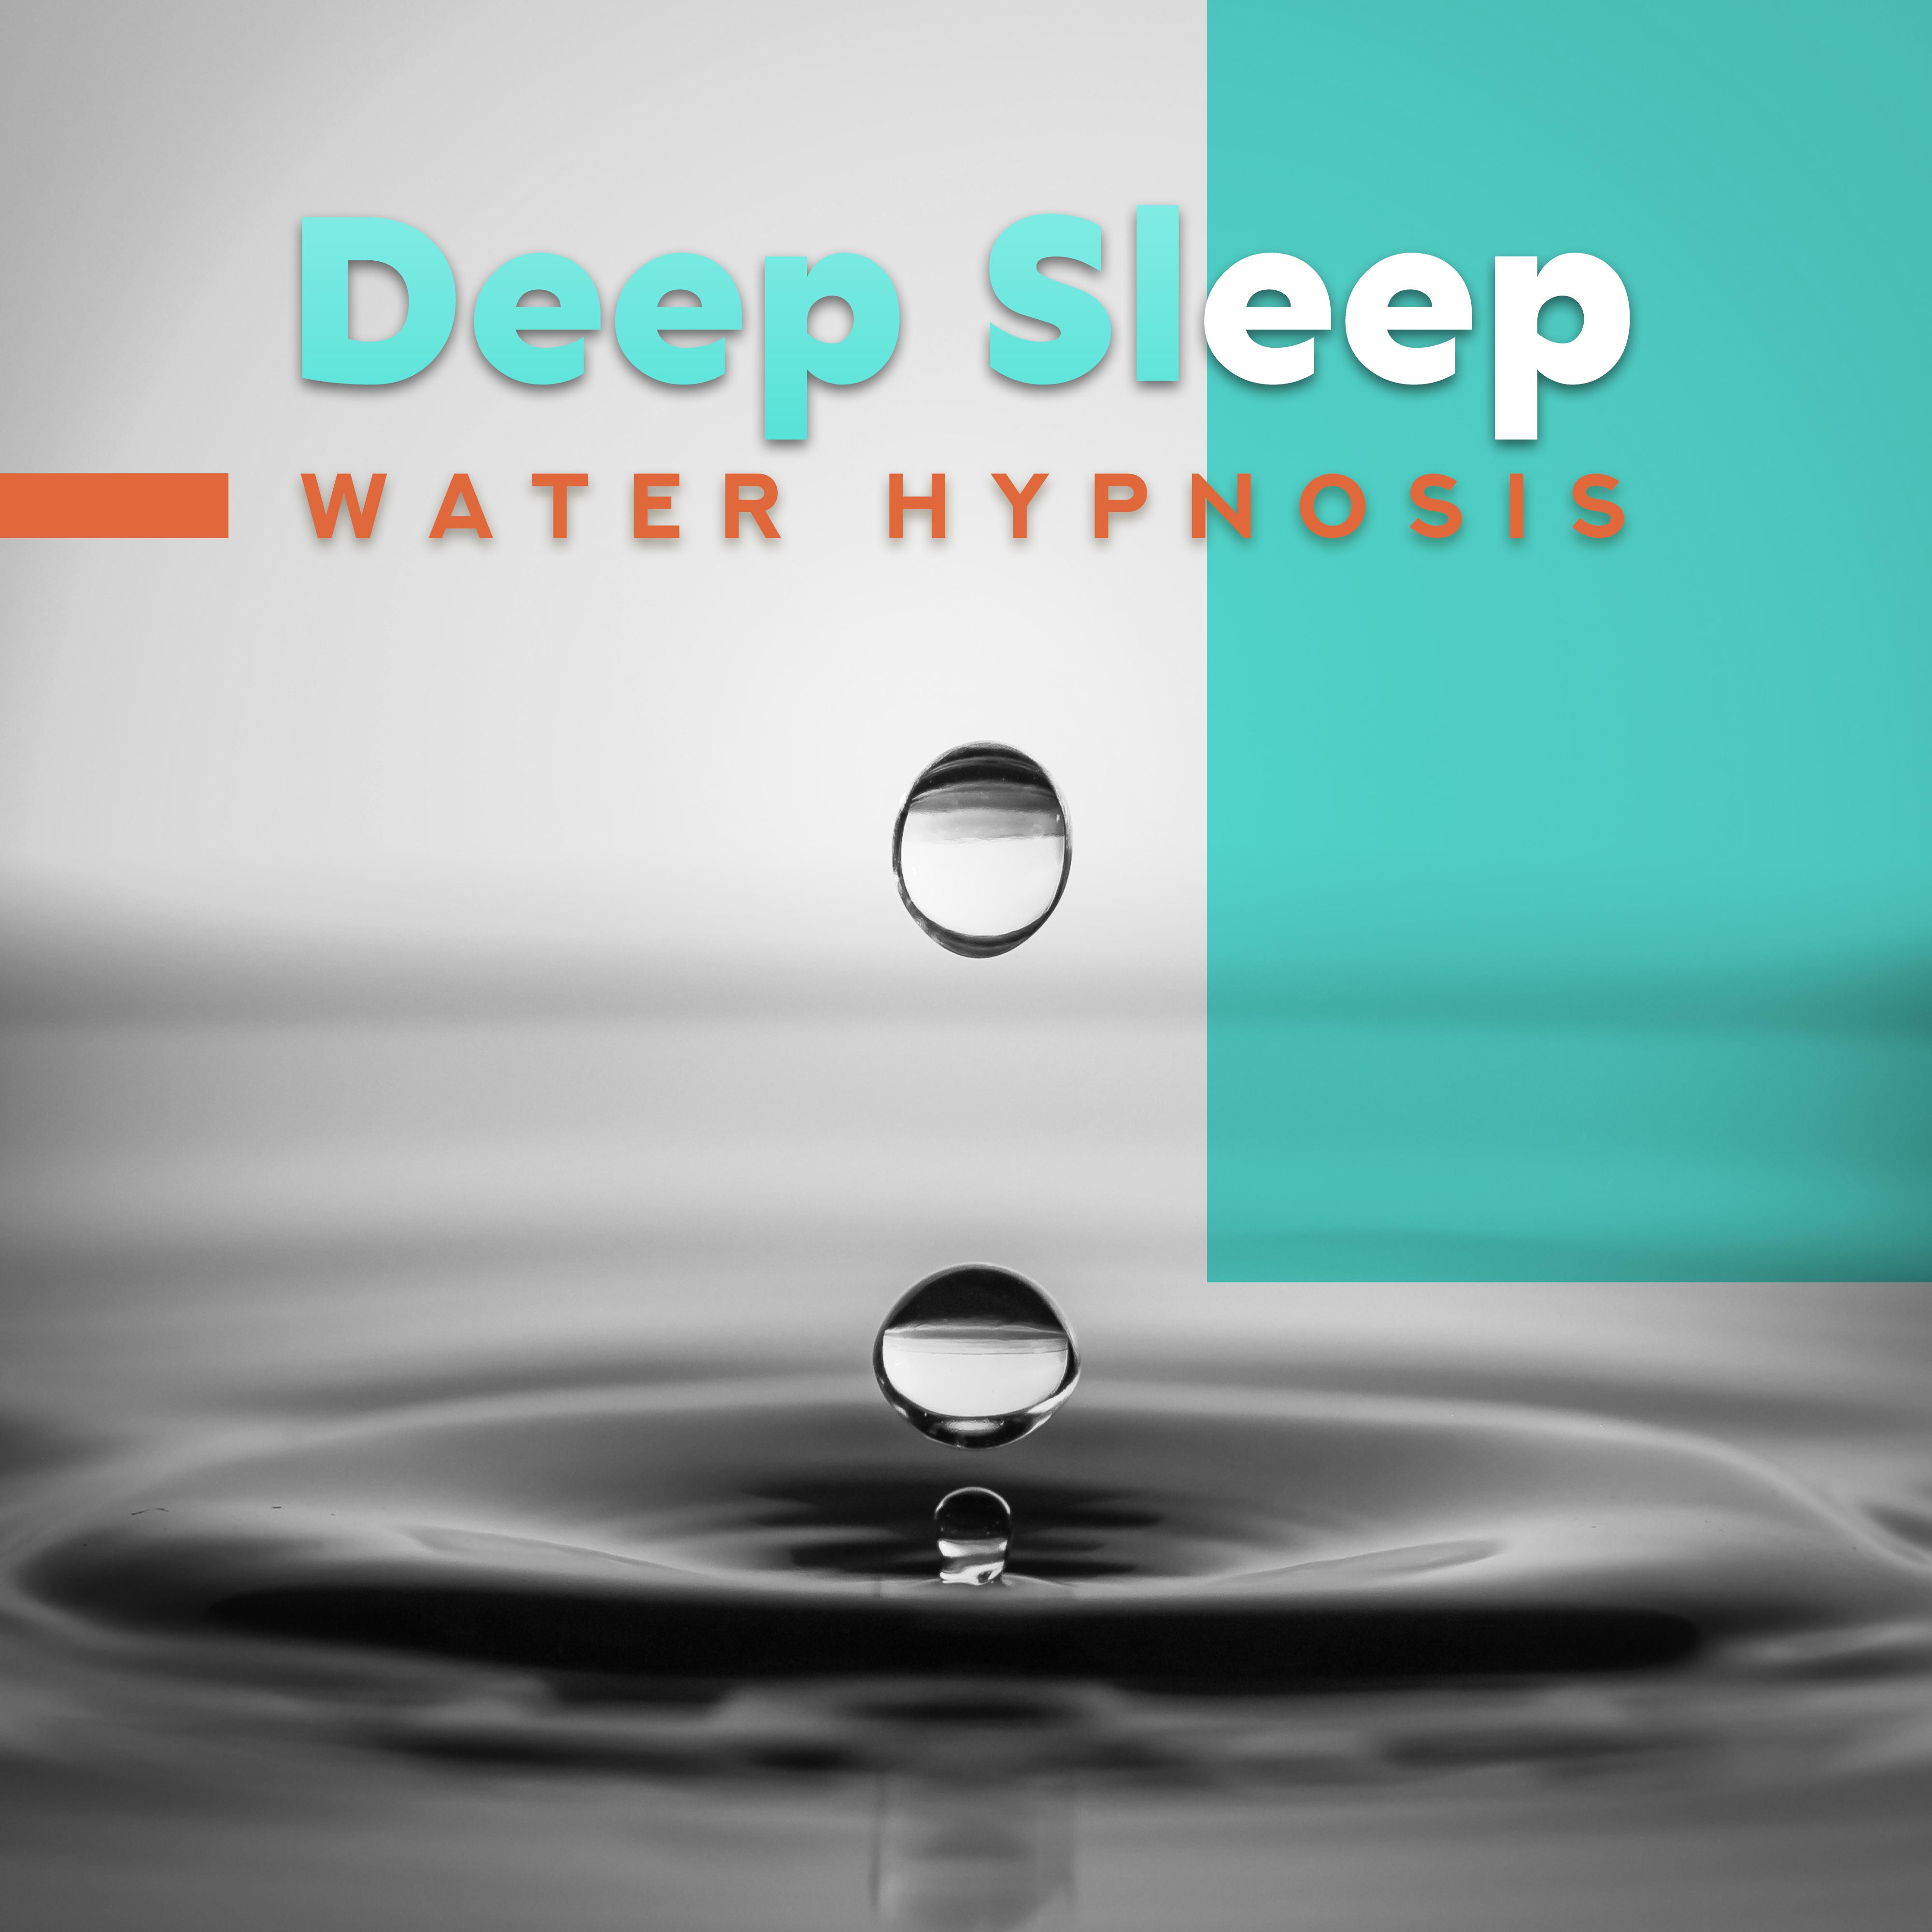 Deep Sleep Water Hypnosis: 2019 New Age Ambient Music for Deep Sleep, Rest & Relax, Most Soothing Melodies & Delicate Sounds of Many Kinds of Water